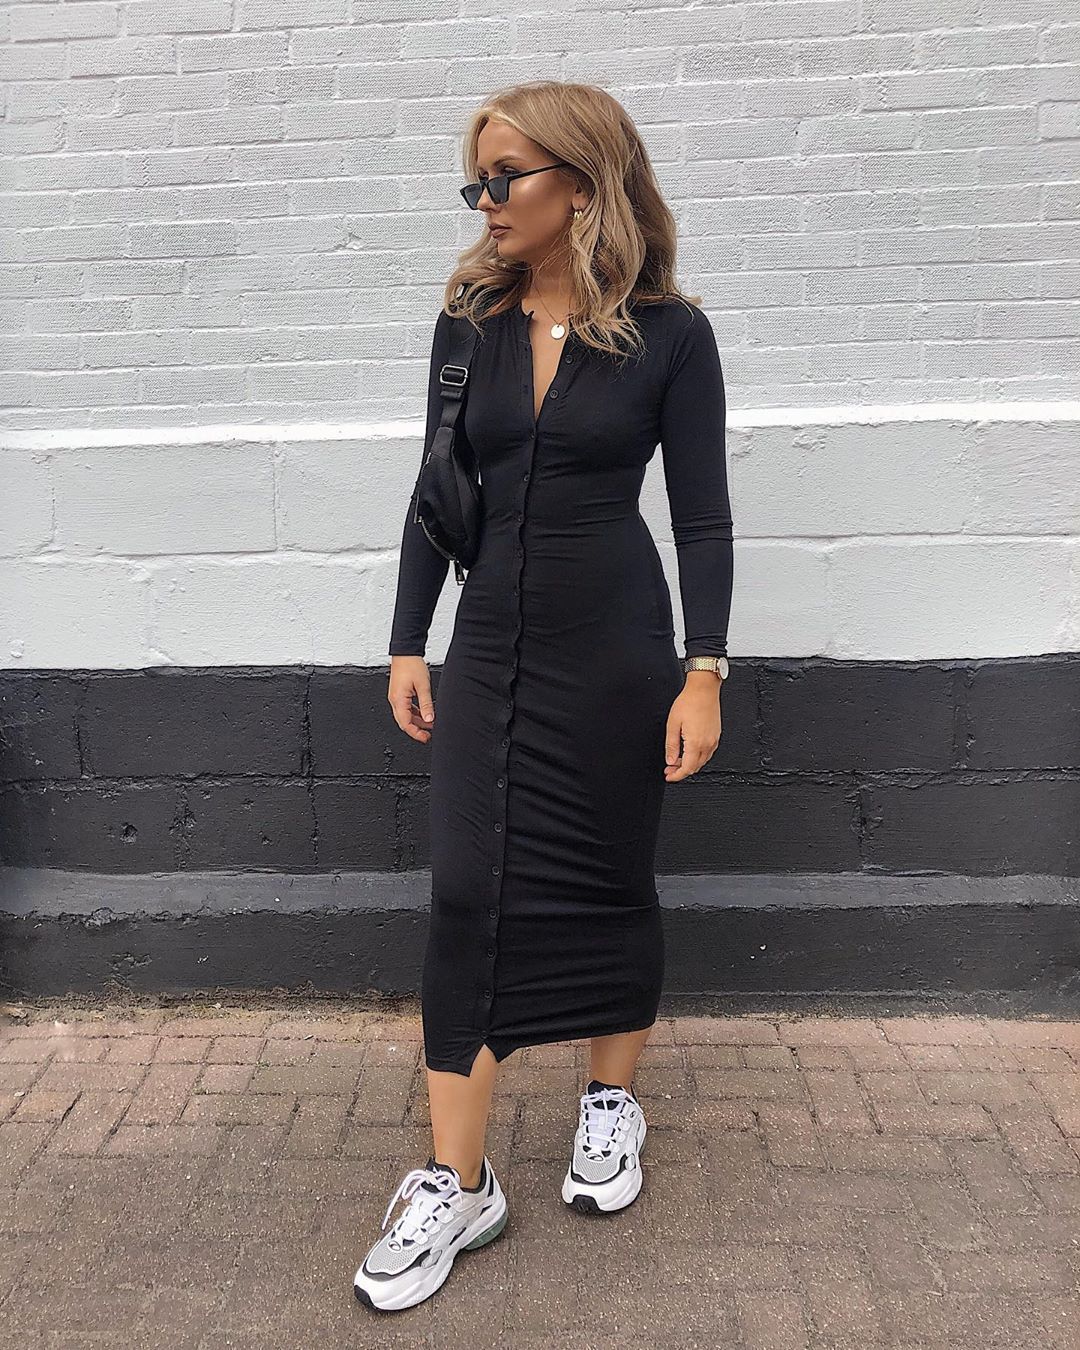 bodycon dress with trainers